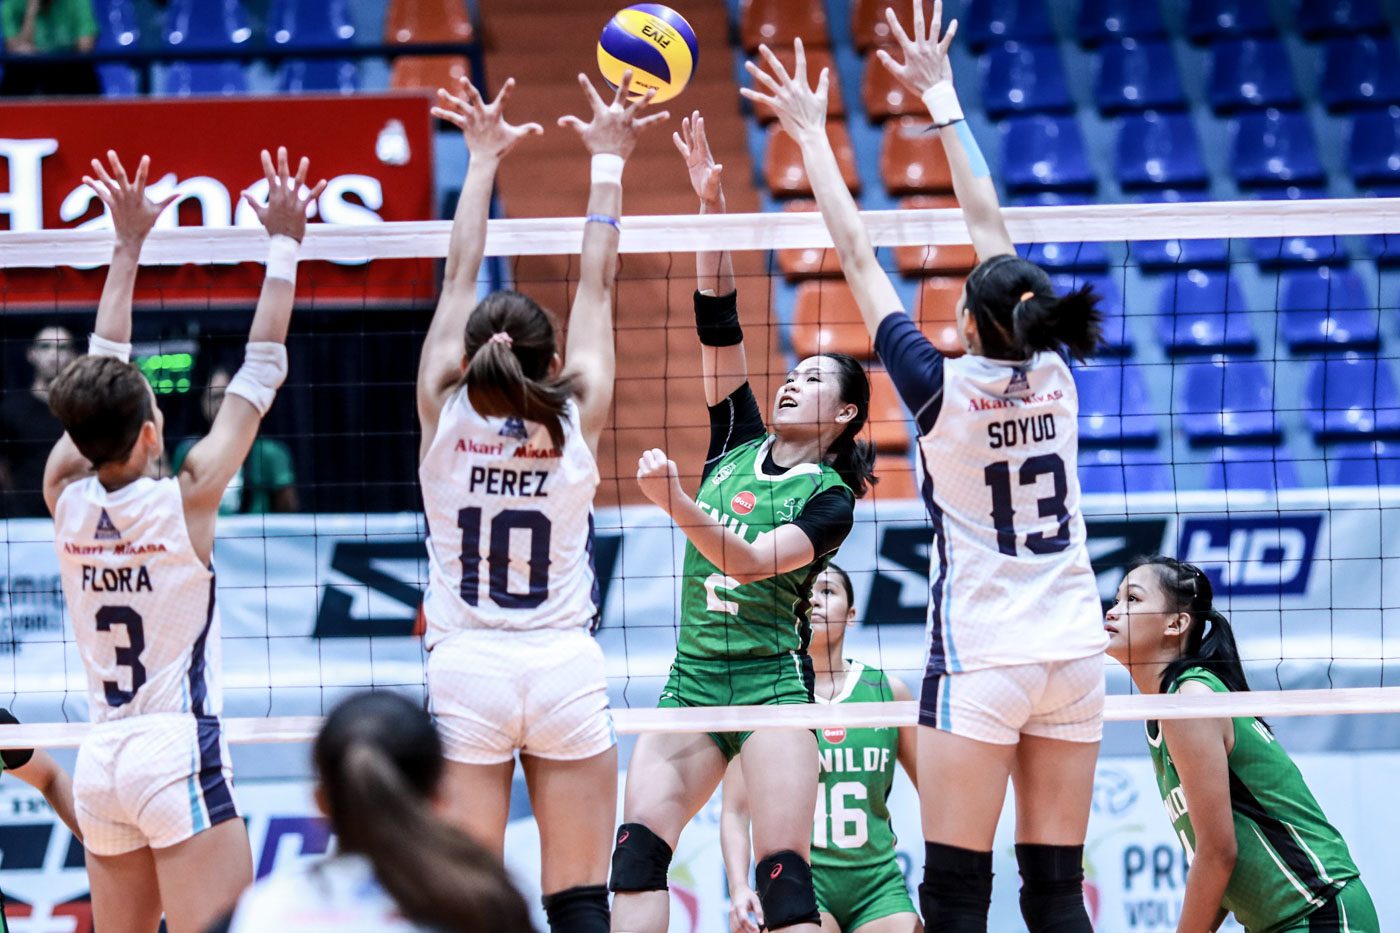 Lady Falcons pull off ‘ugly win’ vs Blazers